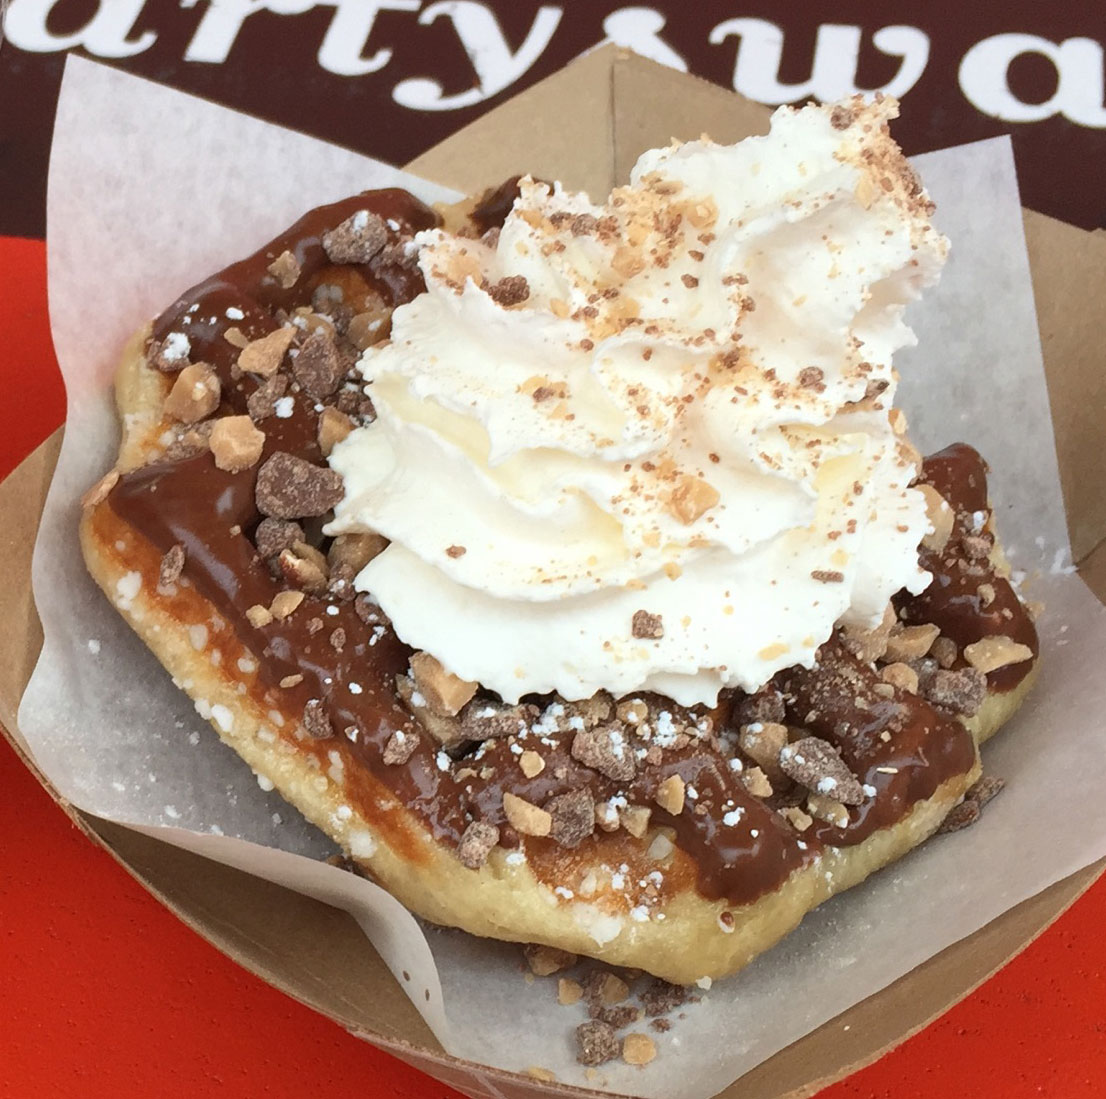 Marty's waffle with heath bar crunch and maple whipped cream